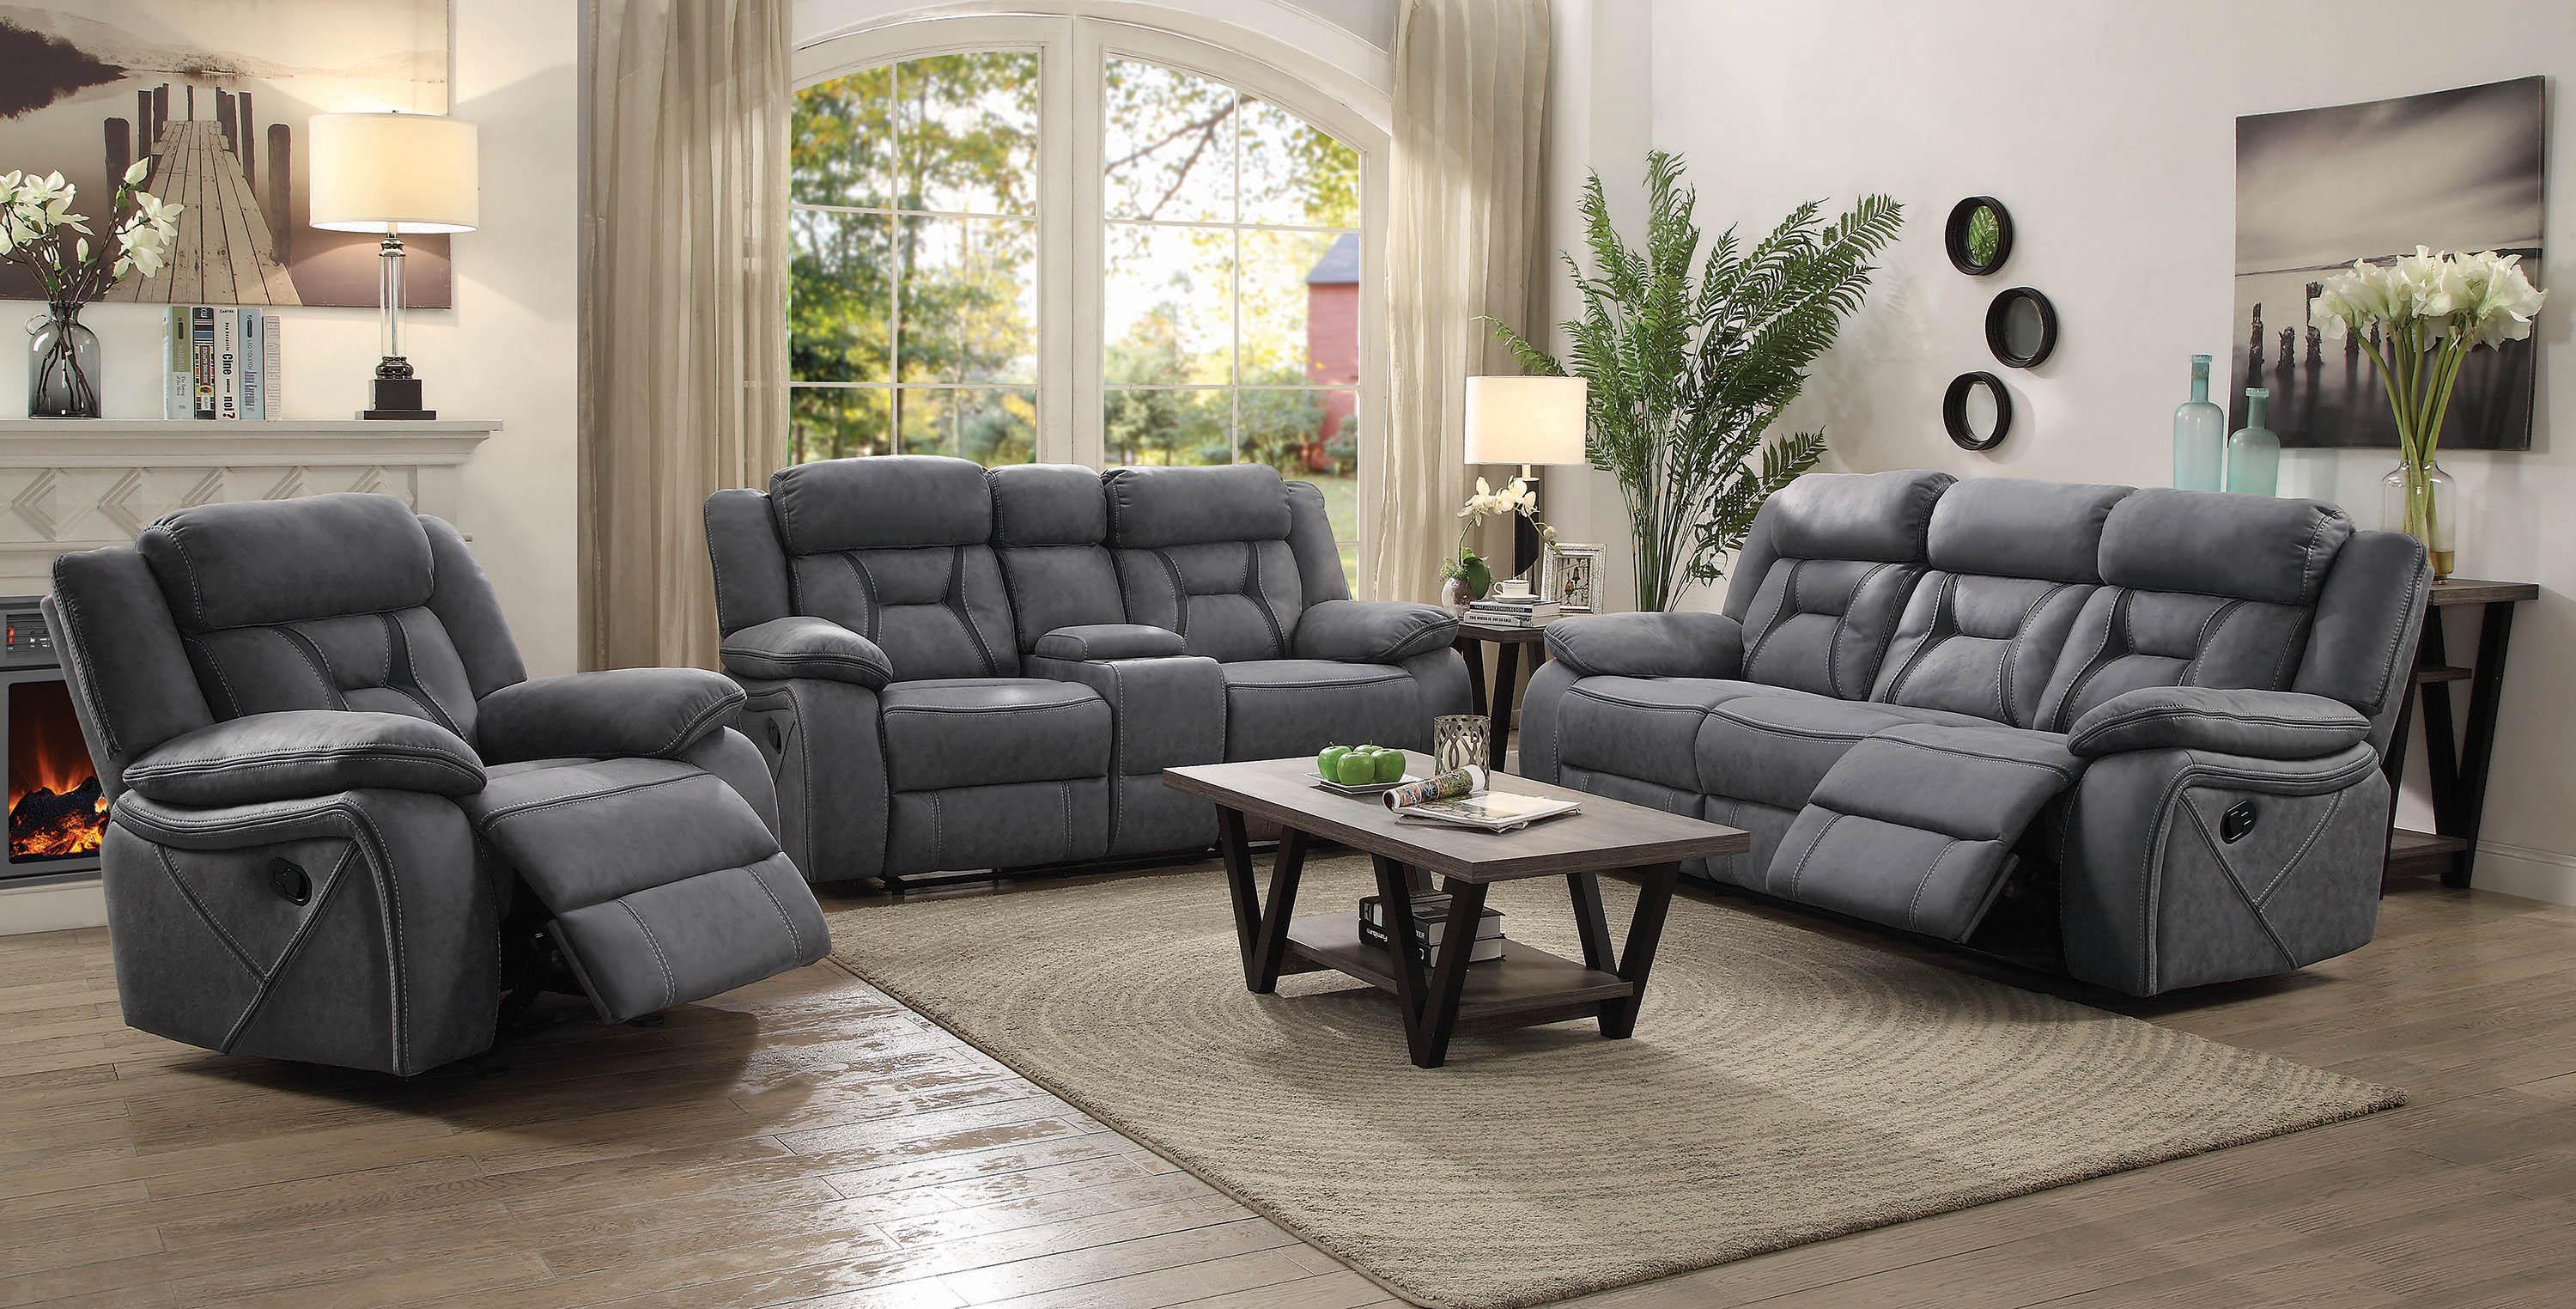 Transitional Reclining Loveseat Houston 602262 in Gray Leather